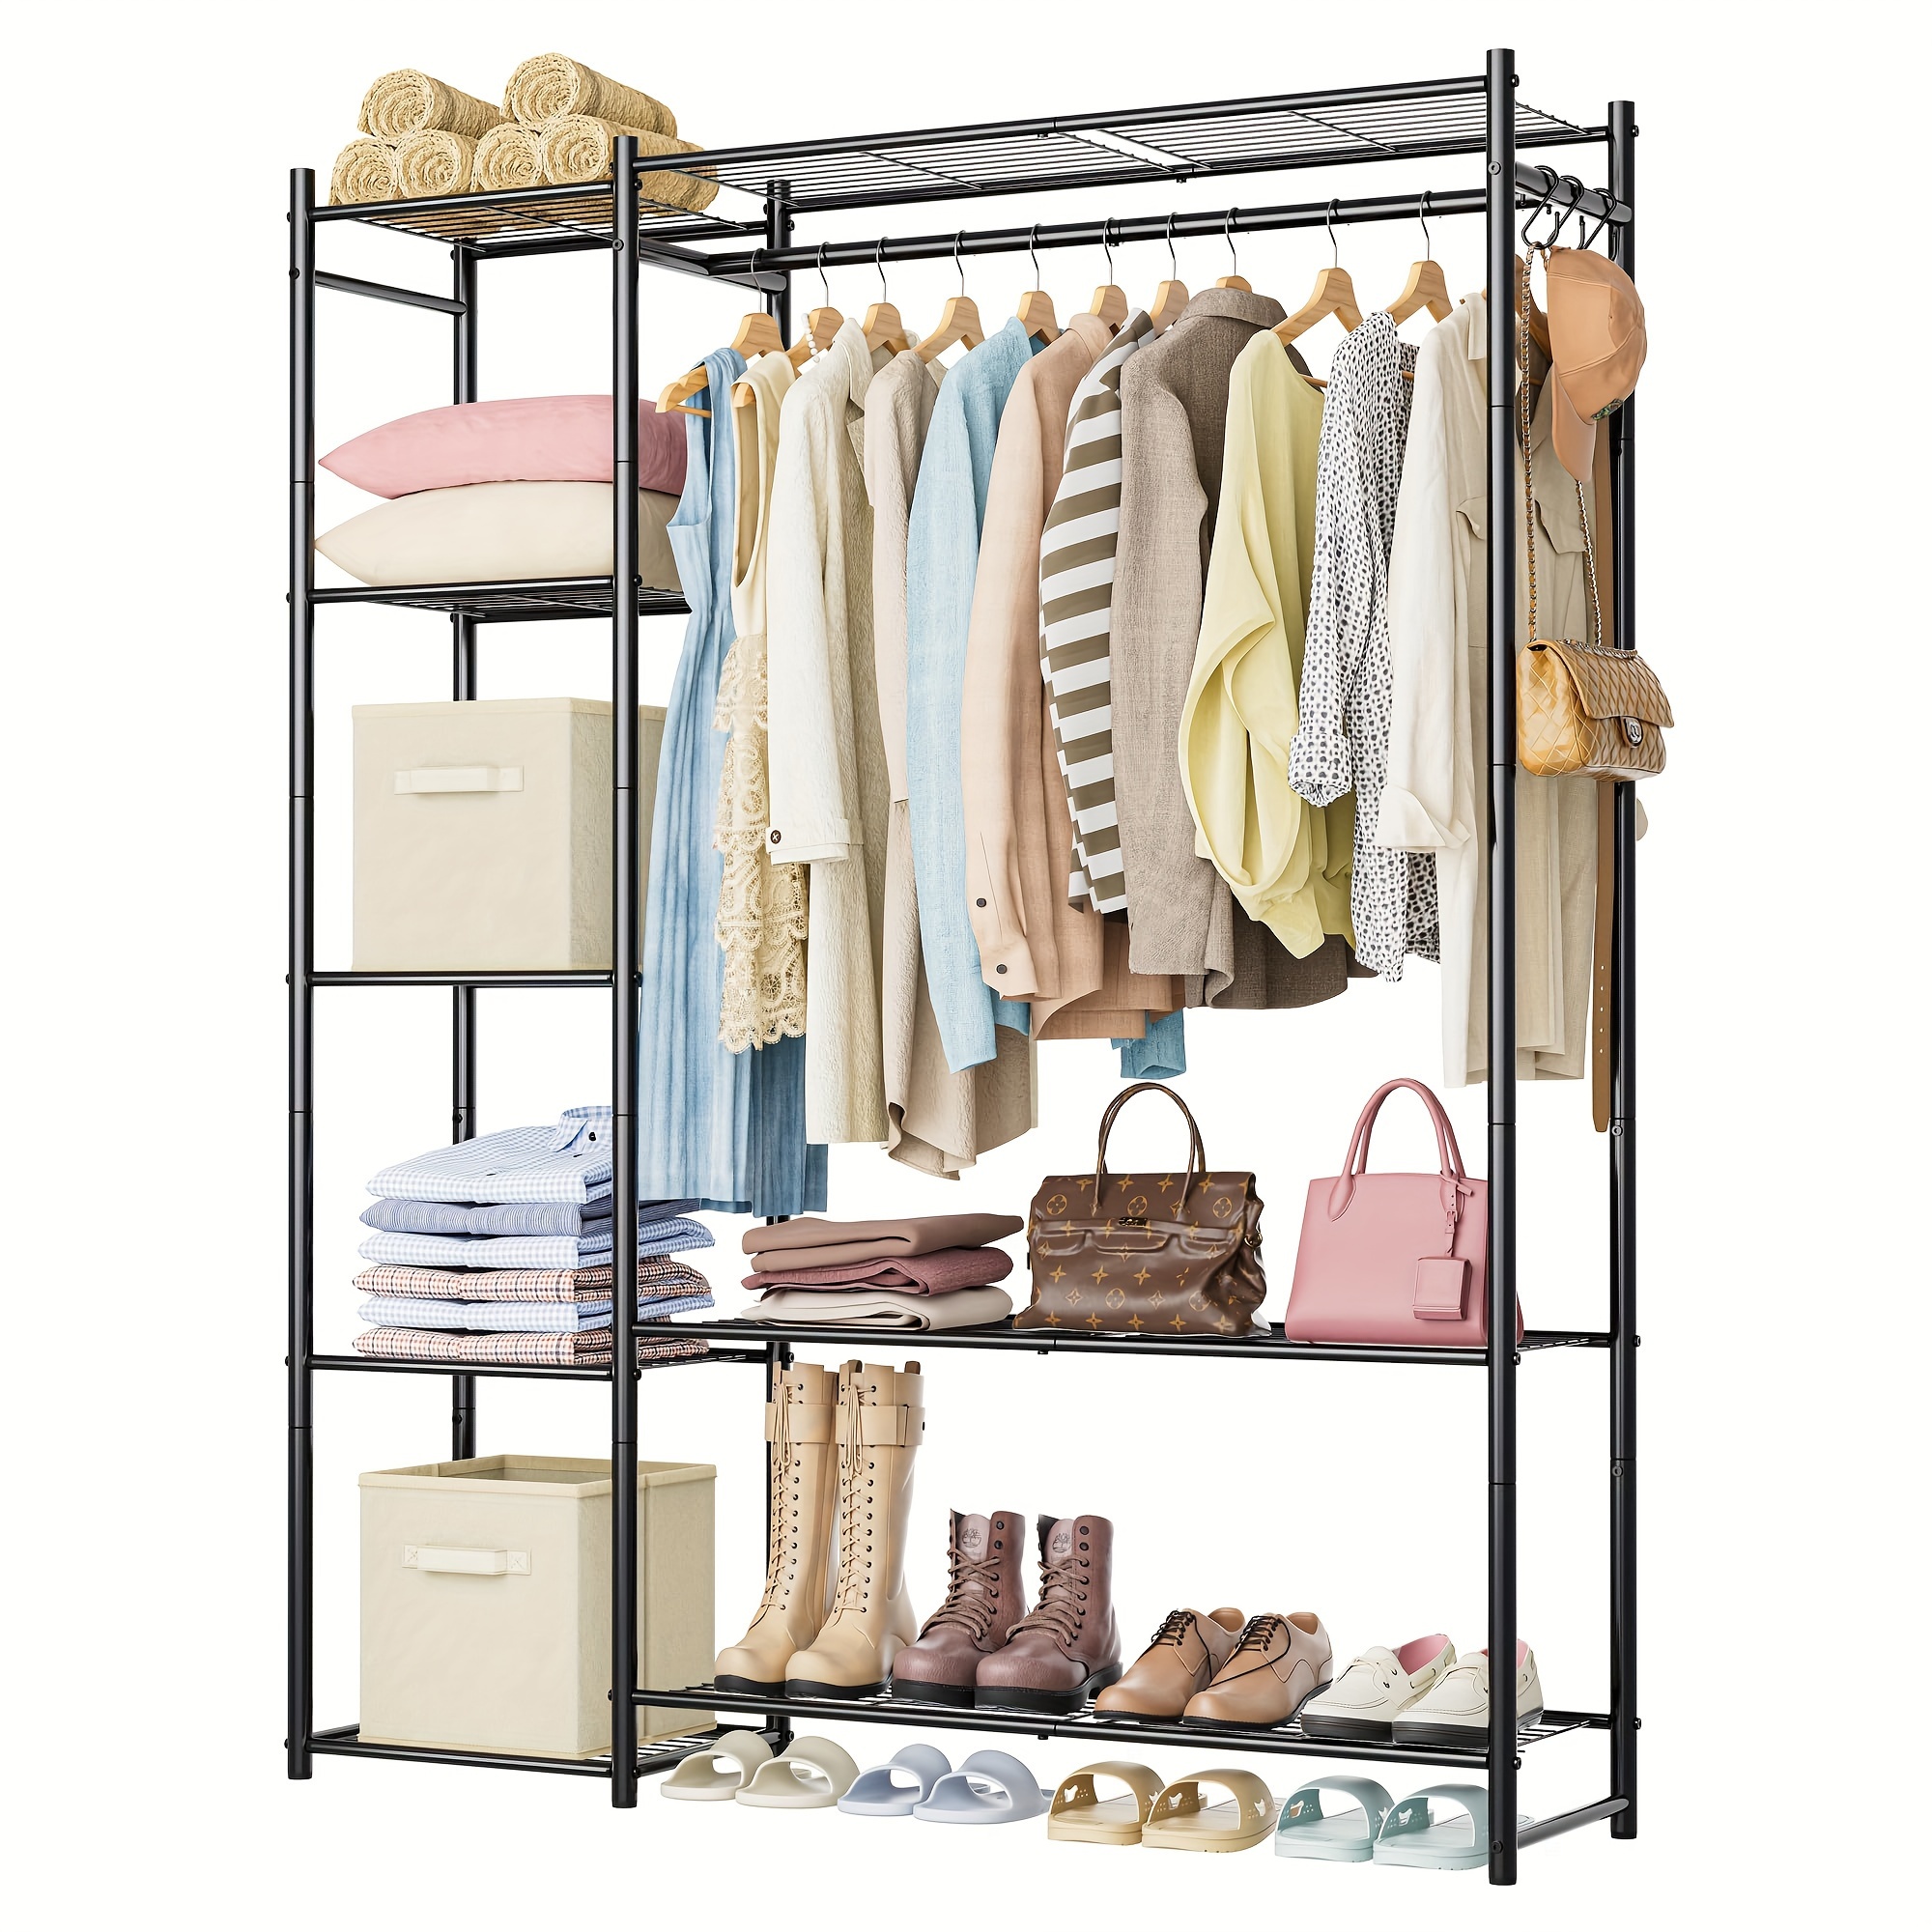 

Clothing Rack With Shelves, Portable Wardrobe Closet For Hanging Clothes Rods, Free Standing Shelves Organizers And Storage